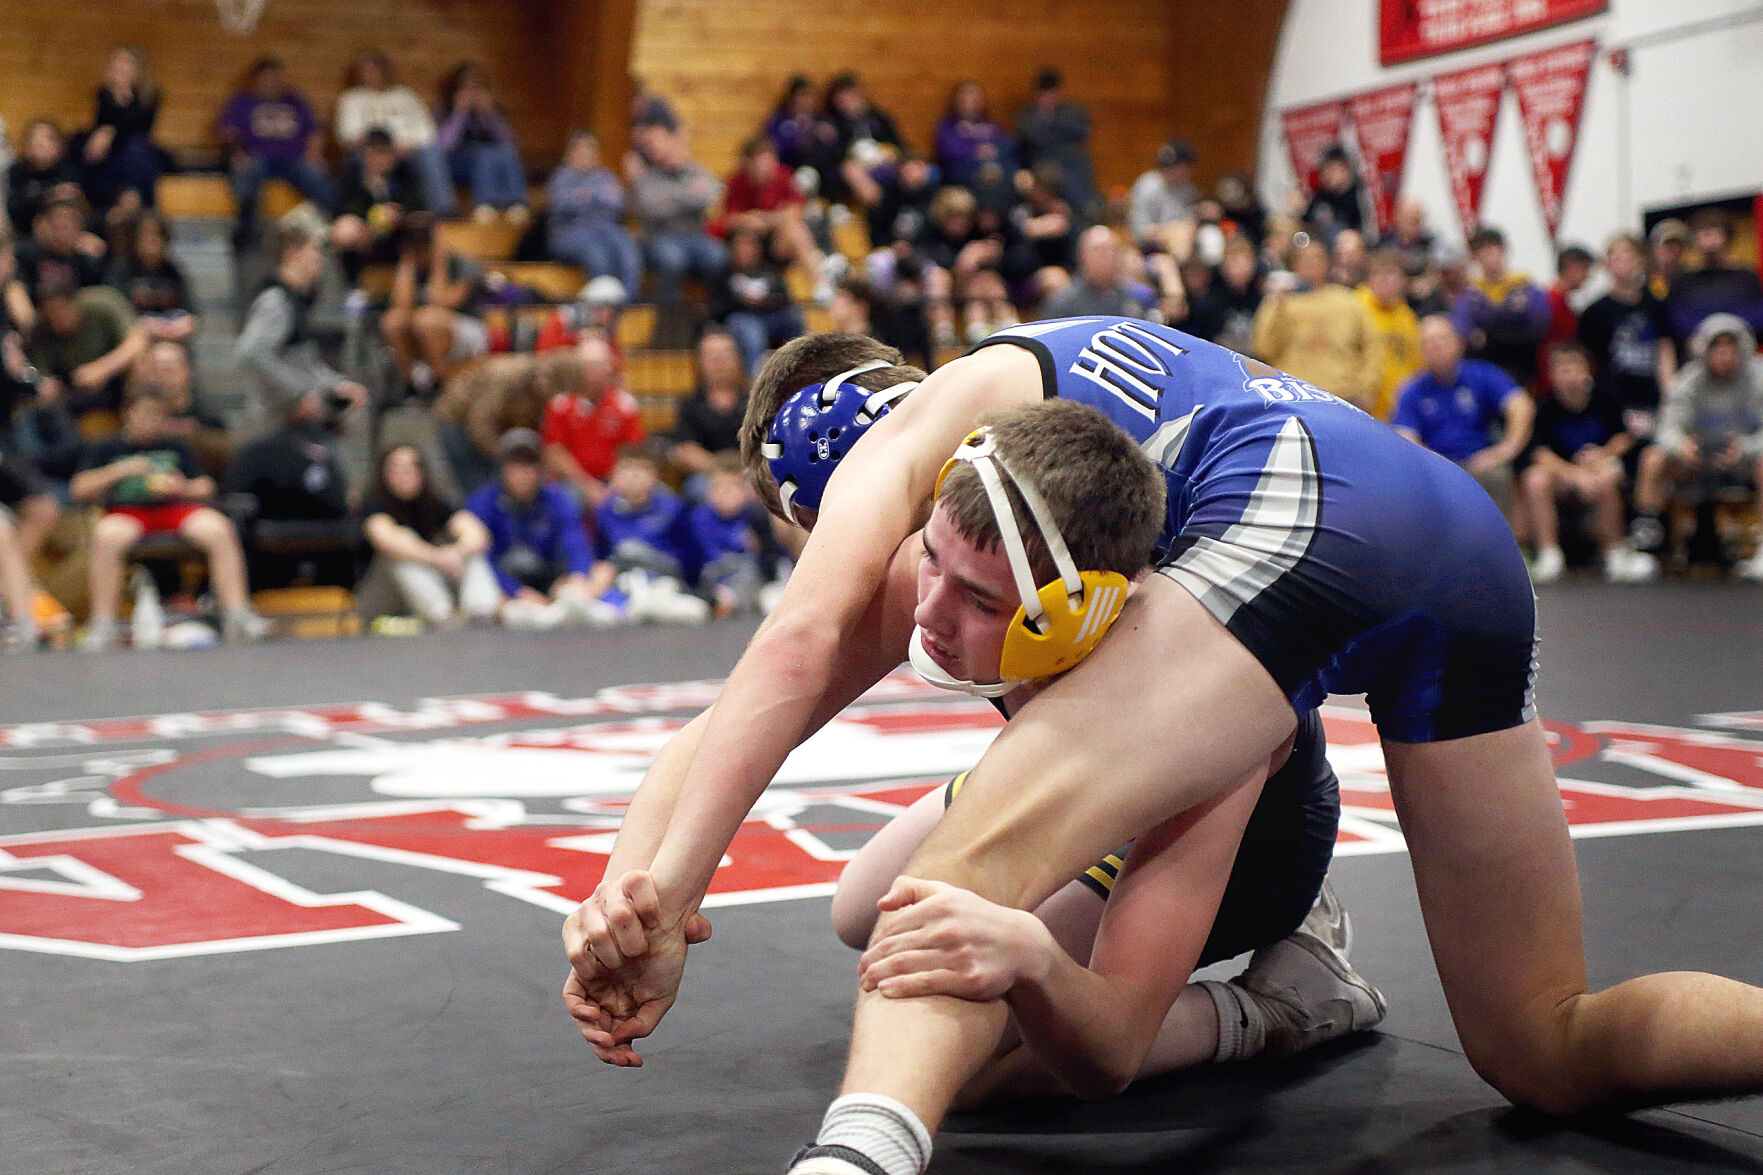 Local Wrestling Tournaments Roundup: Pierre and Sturgis Brown Dominate, Rapid City Wrestlers Secure Leads